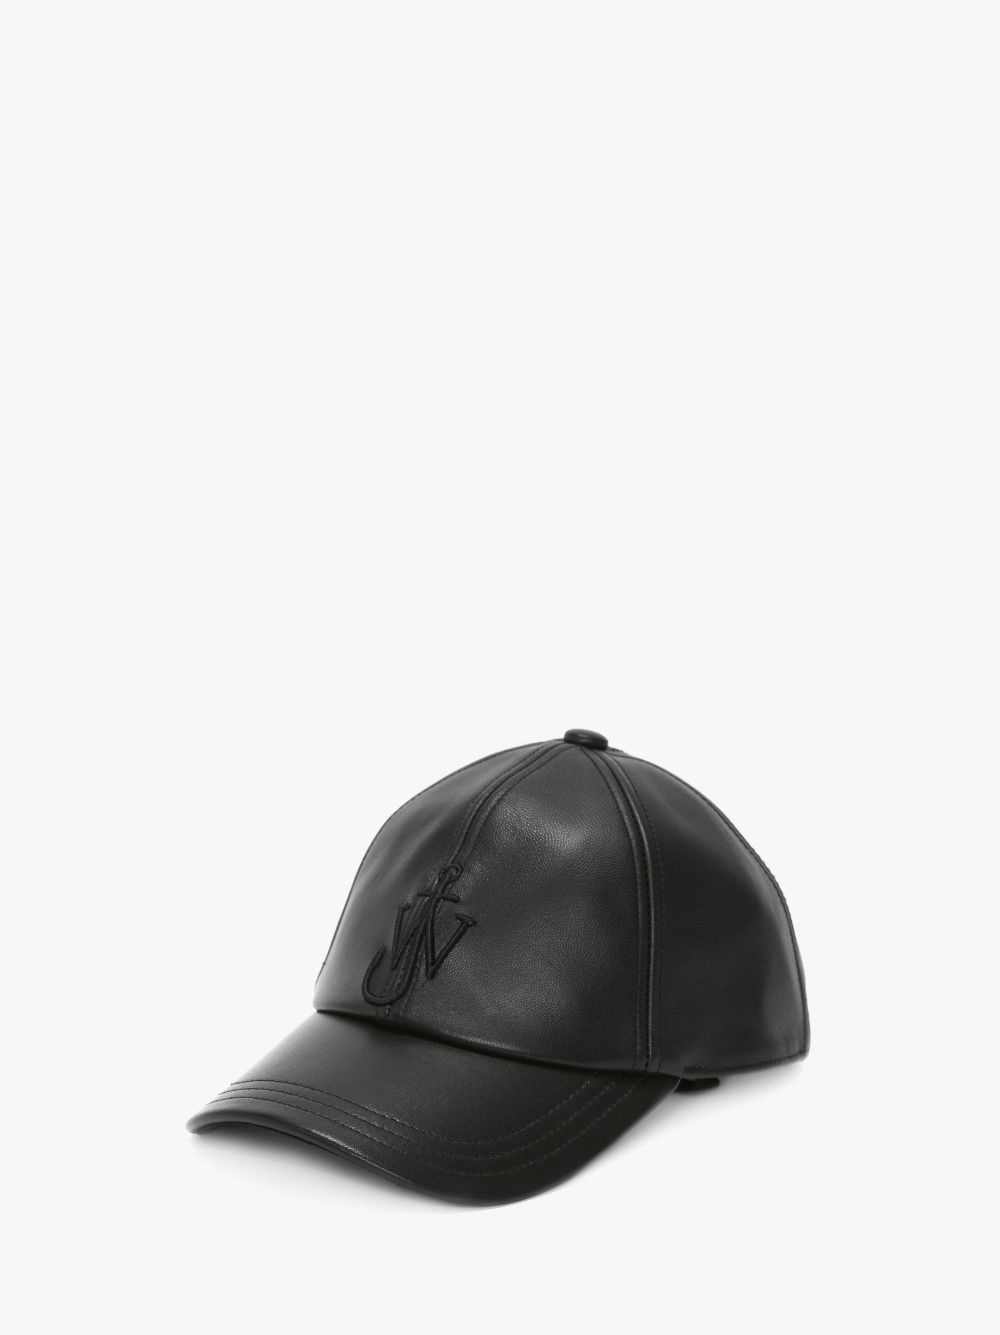 LEATHER BASEBALL CAP WITH ANCHOR LOGO - 2